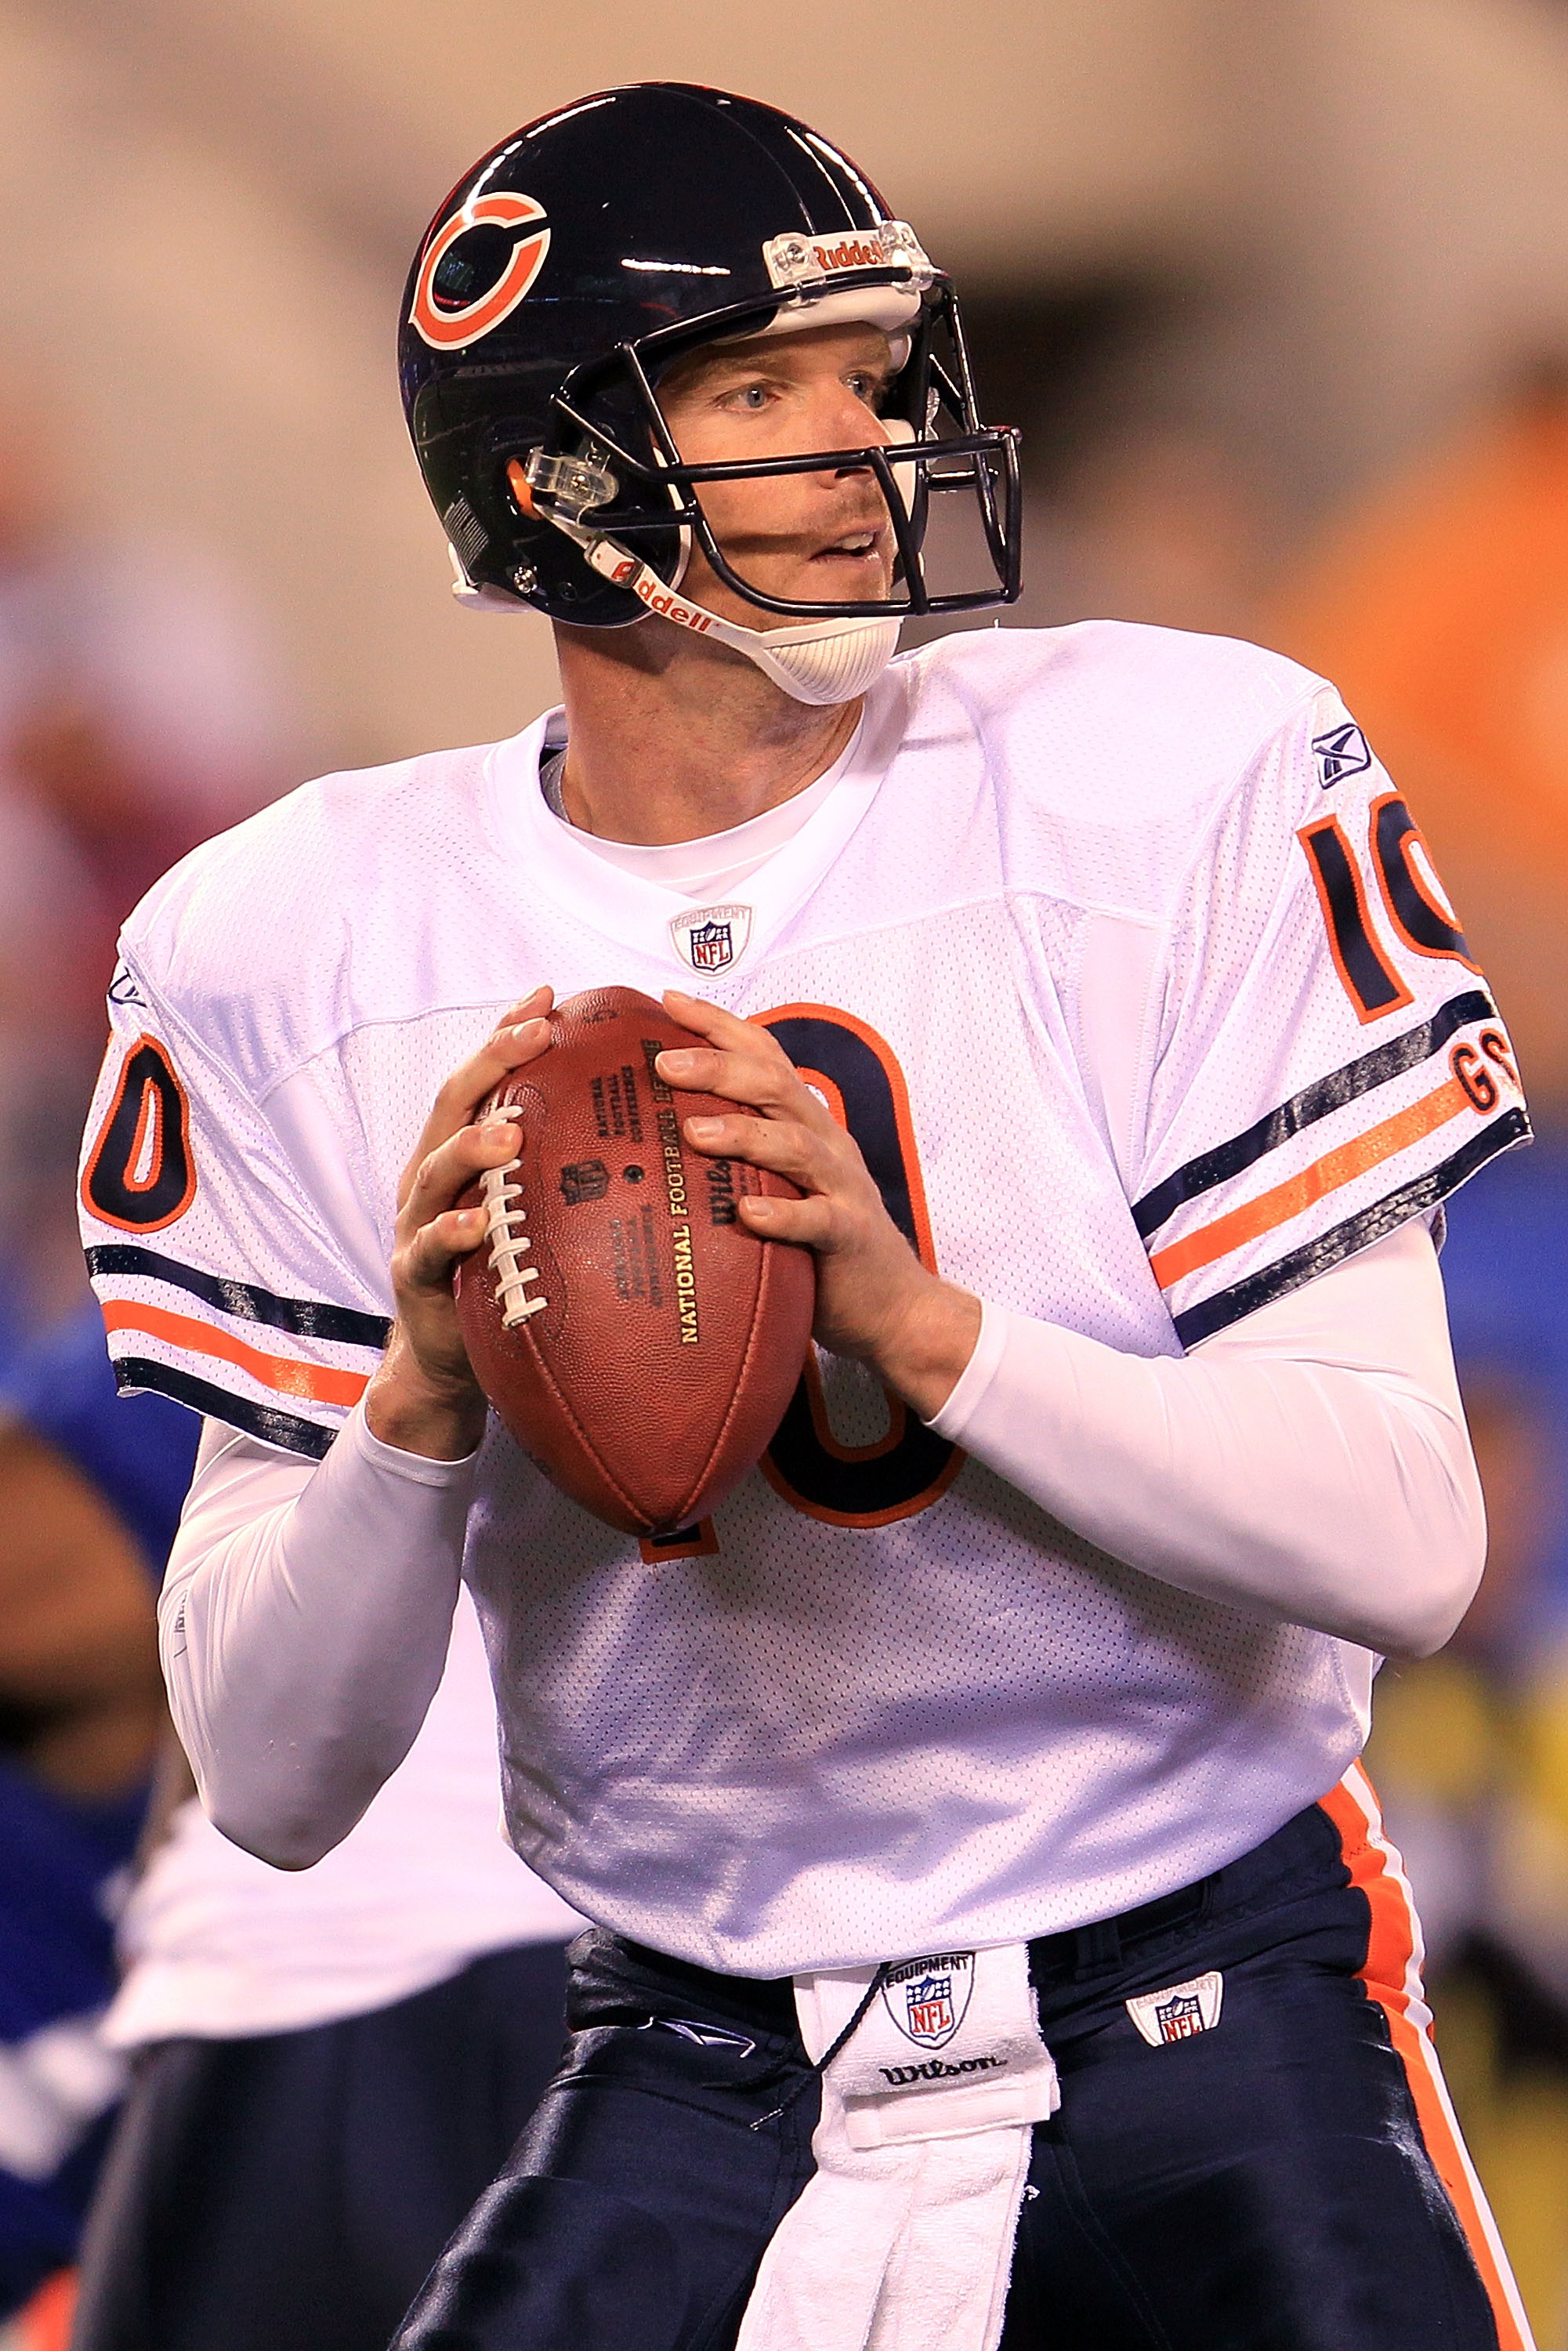 EAST RUTHERFORD, NJ - OCTOBER 03:  Todd Collins #10 of the Chicago Bears drops back to pass against the New York Giants at New Meadowlands Stadium on October 3, 2010 in East Rutherford, New Jersey.  (Photo by Chris McGrath/Getty Images)